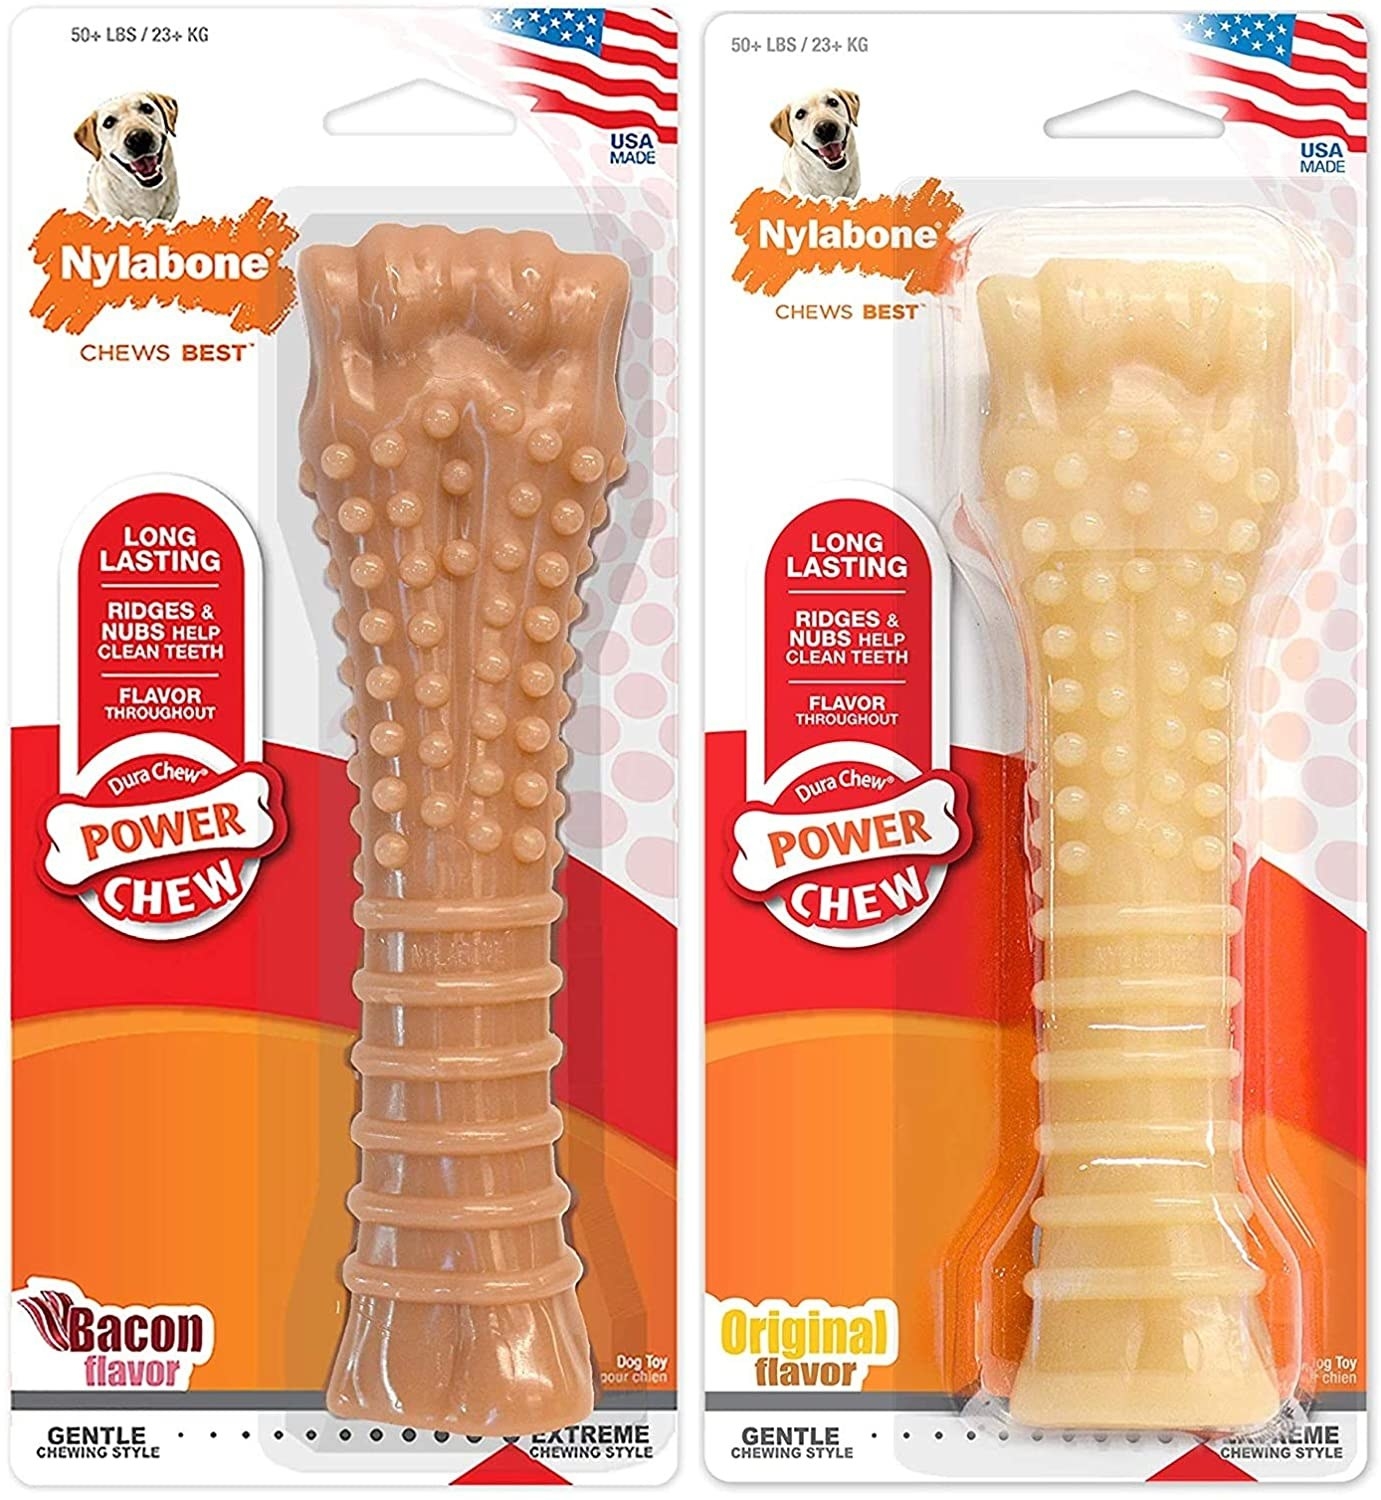 The textured bone-shaped toys